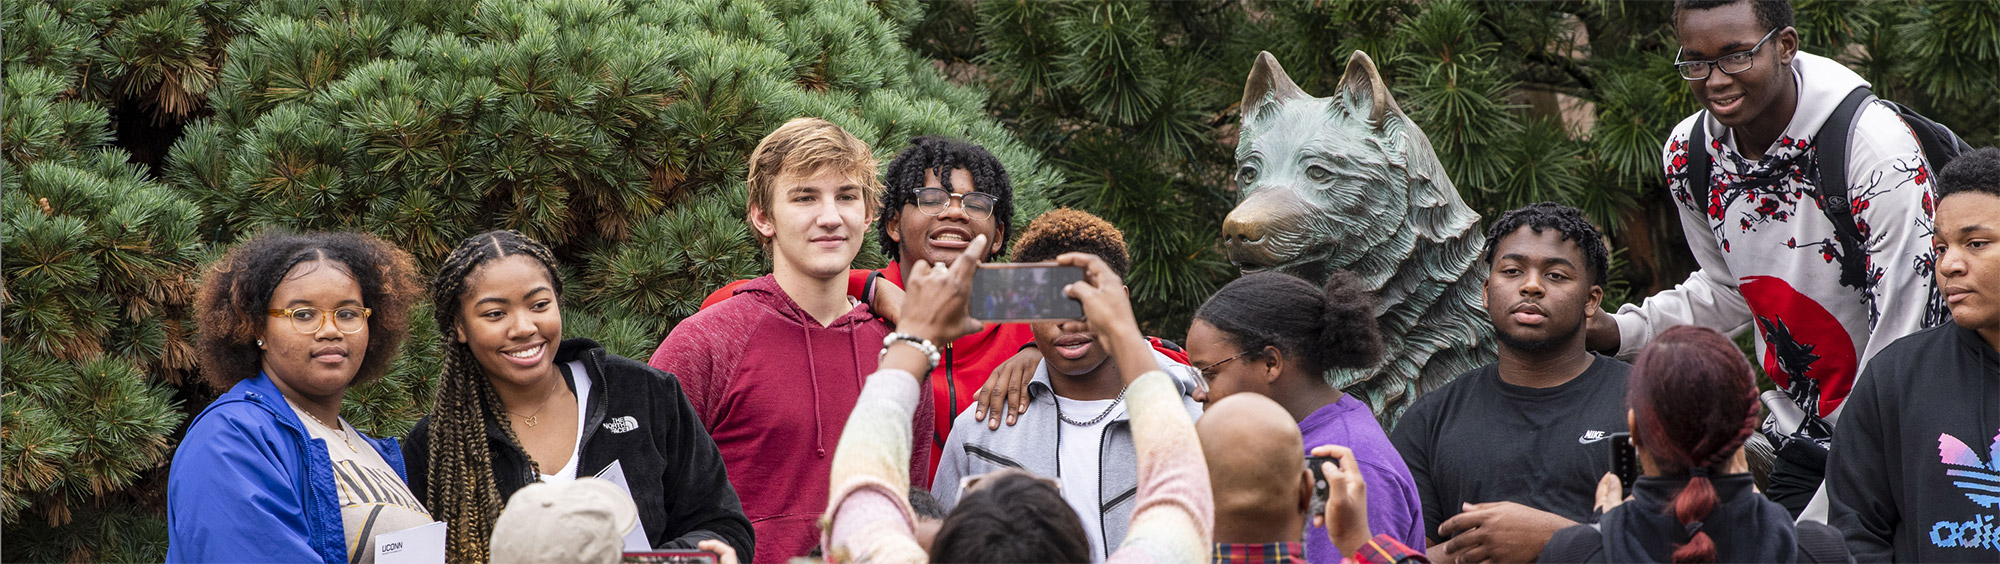 diverse group of prospective students posing for a picture in front of a jonathan the husky statue